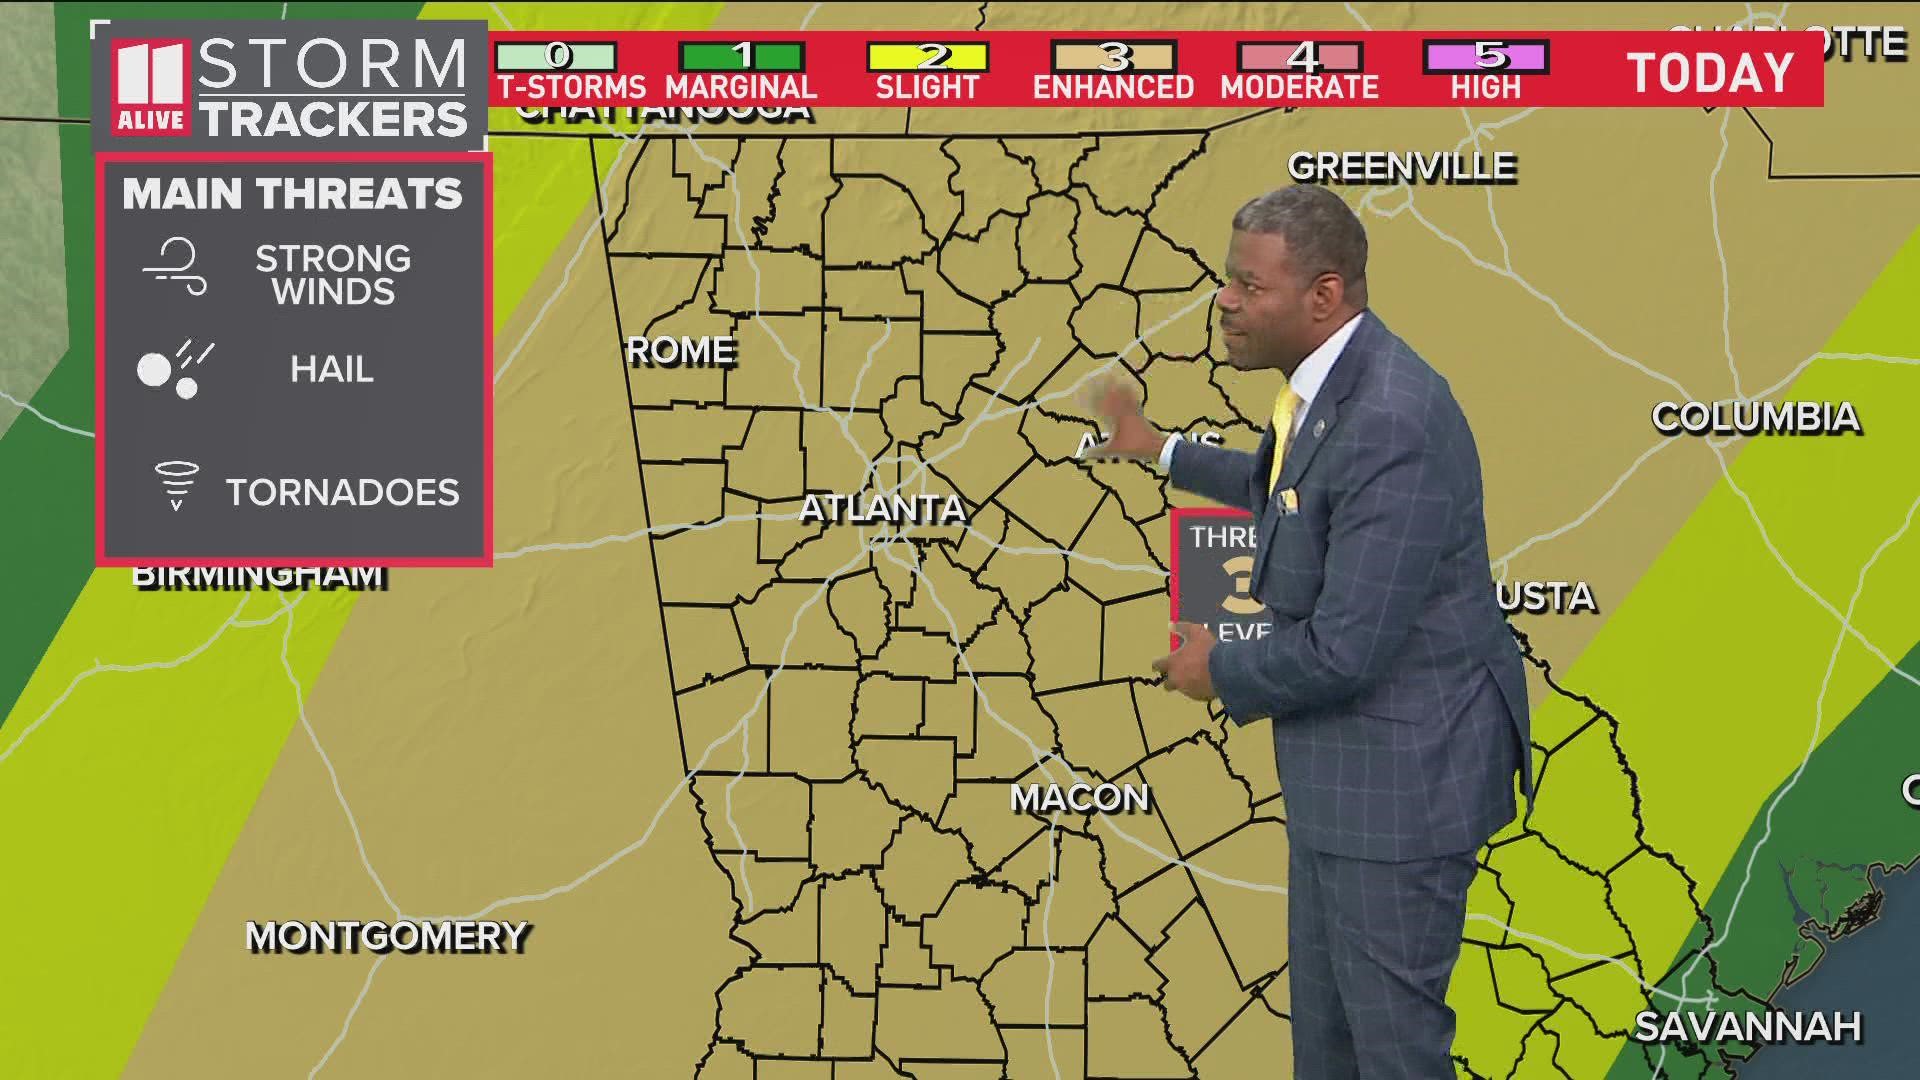 Here's when you can expect severe weather this morning around Atlanta.